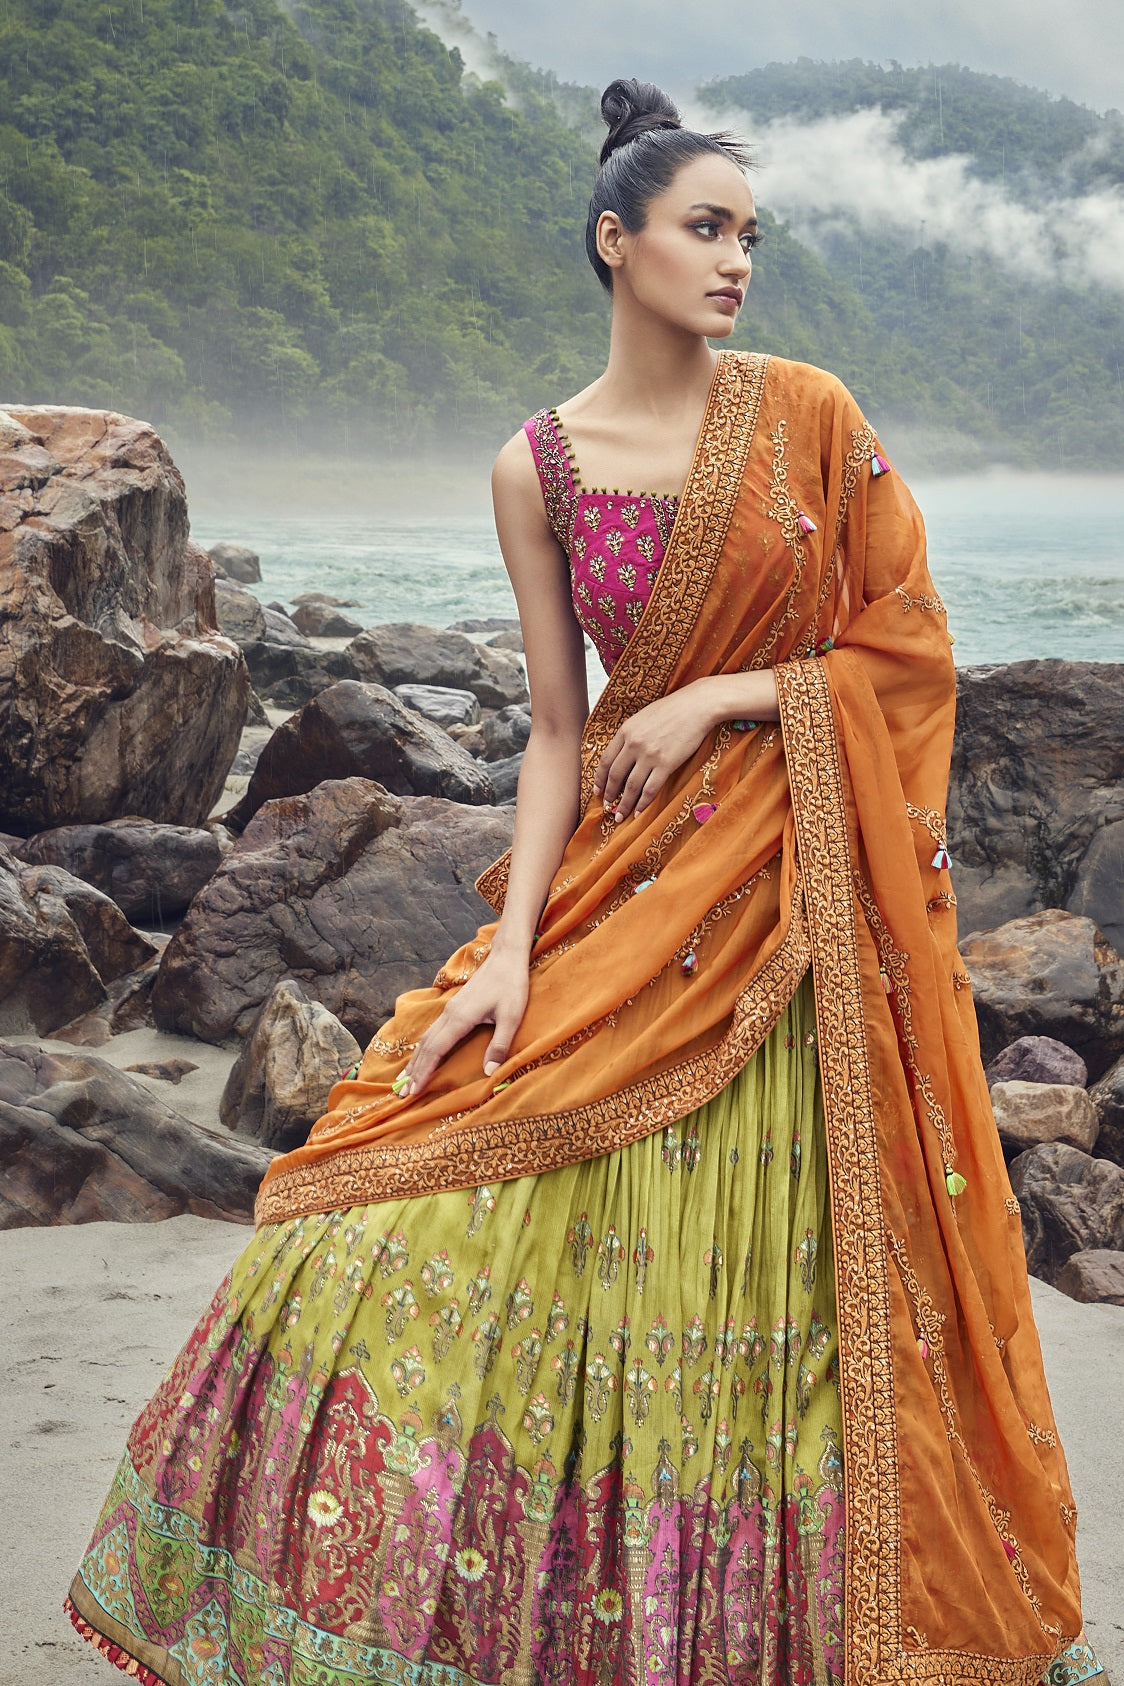 Buy Fuchsia Hand Embroidered Lehenga and Blouse With Orange Dupatta Cape by  Designer NUPUR KANOI Online at Ogaan.com